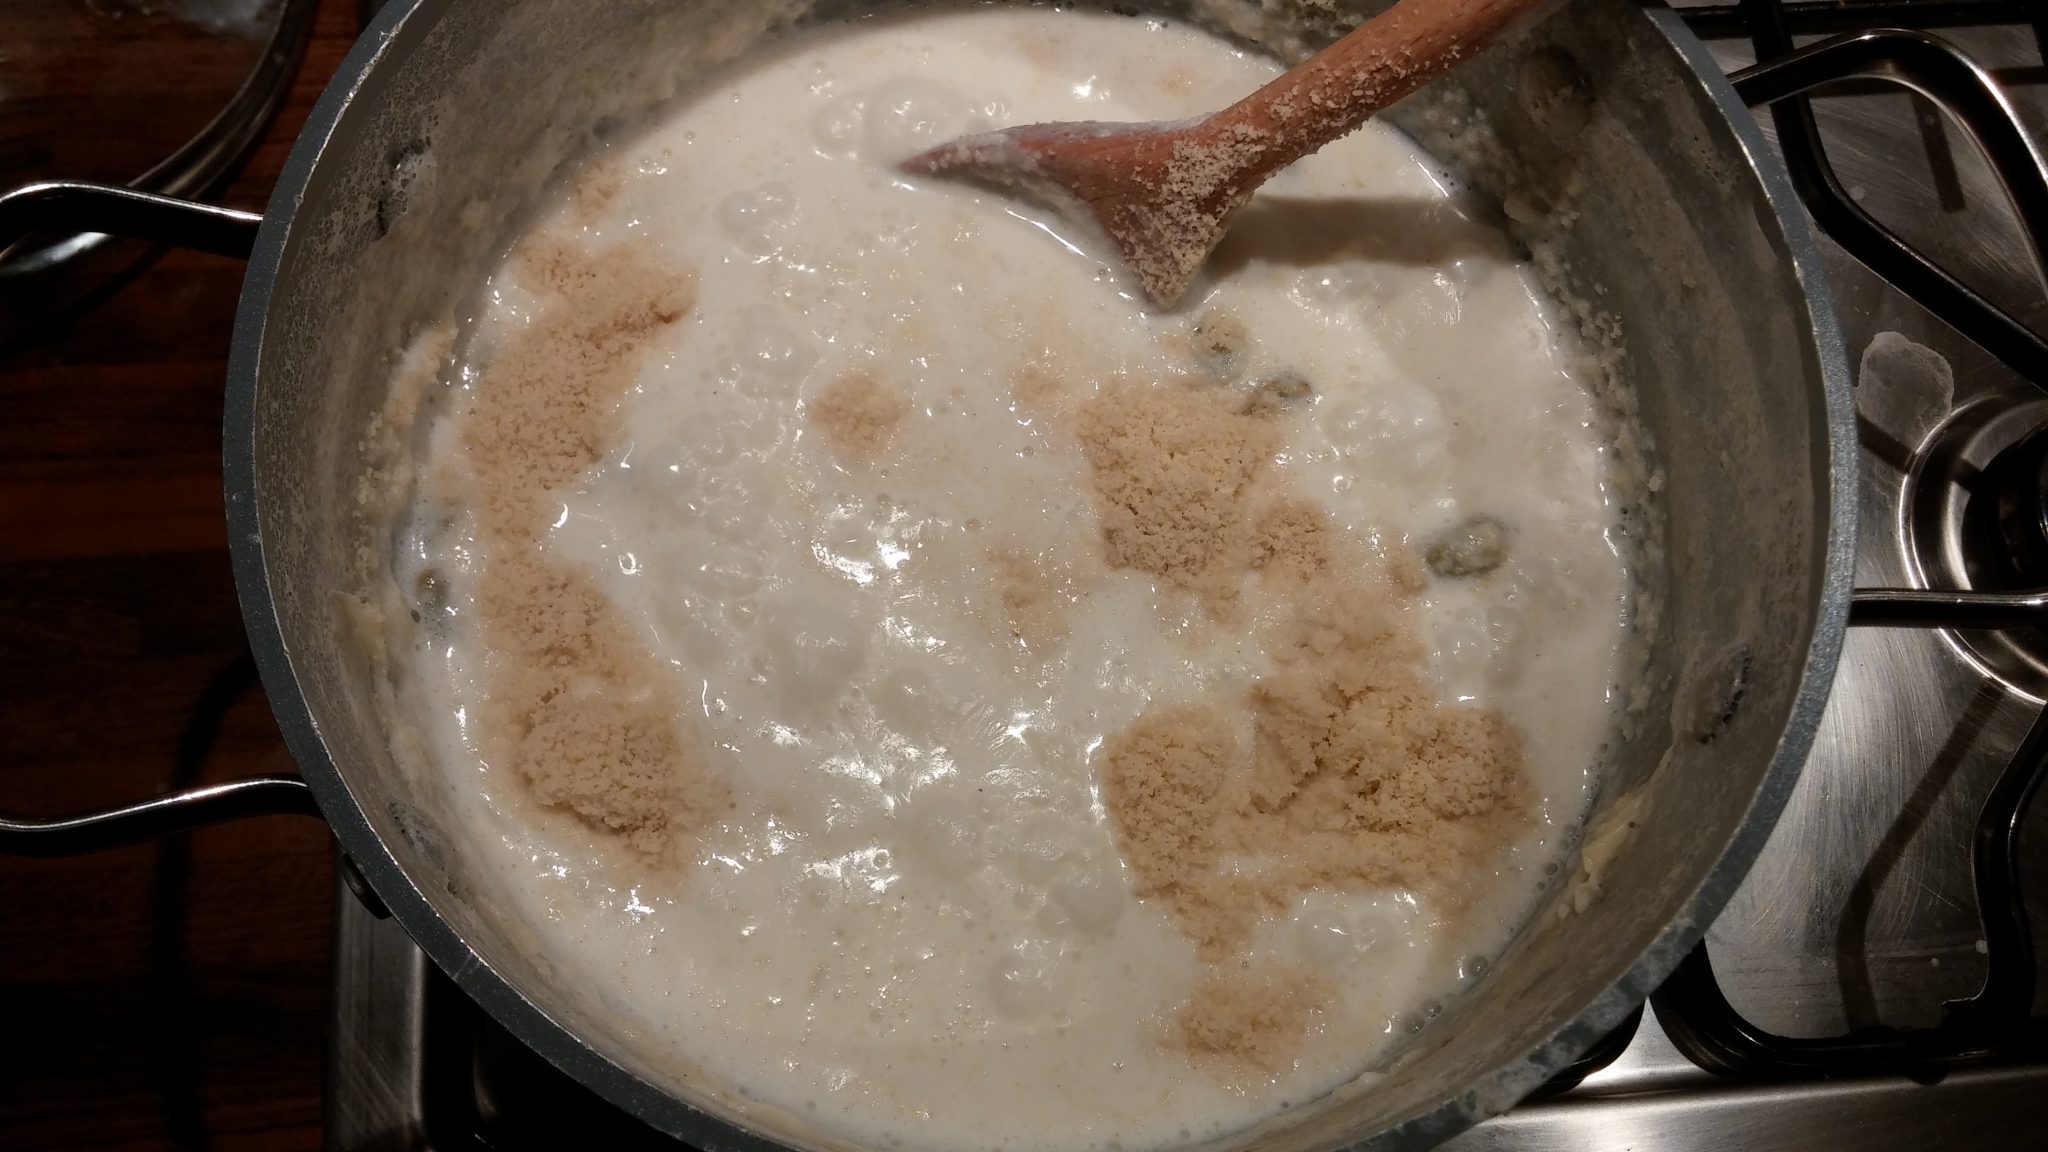 Cooked rice, milk almond powder gently simmering